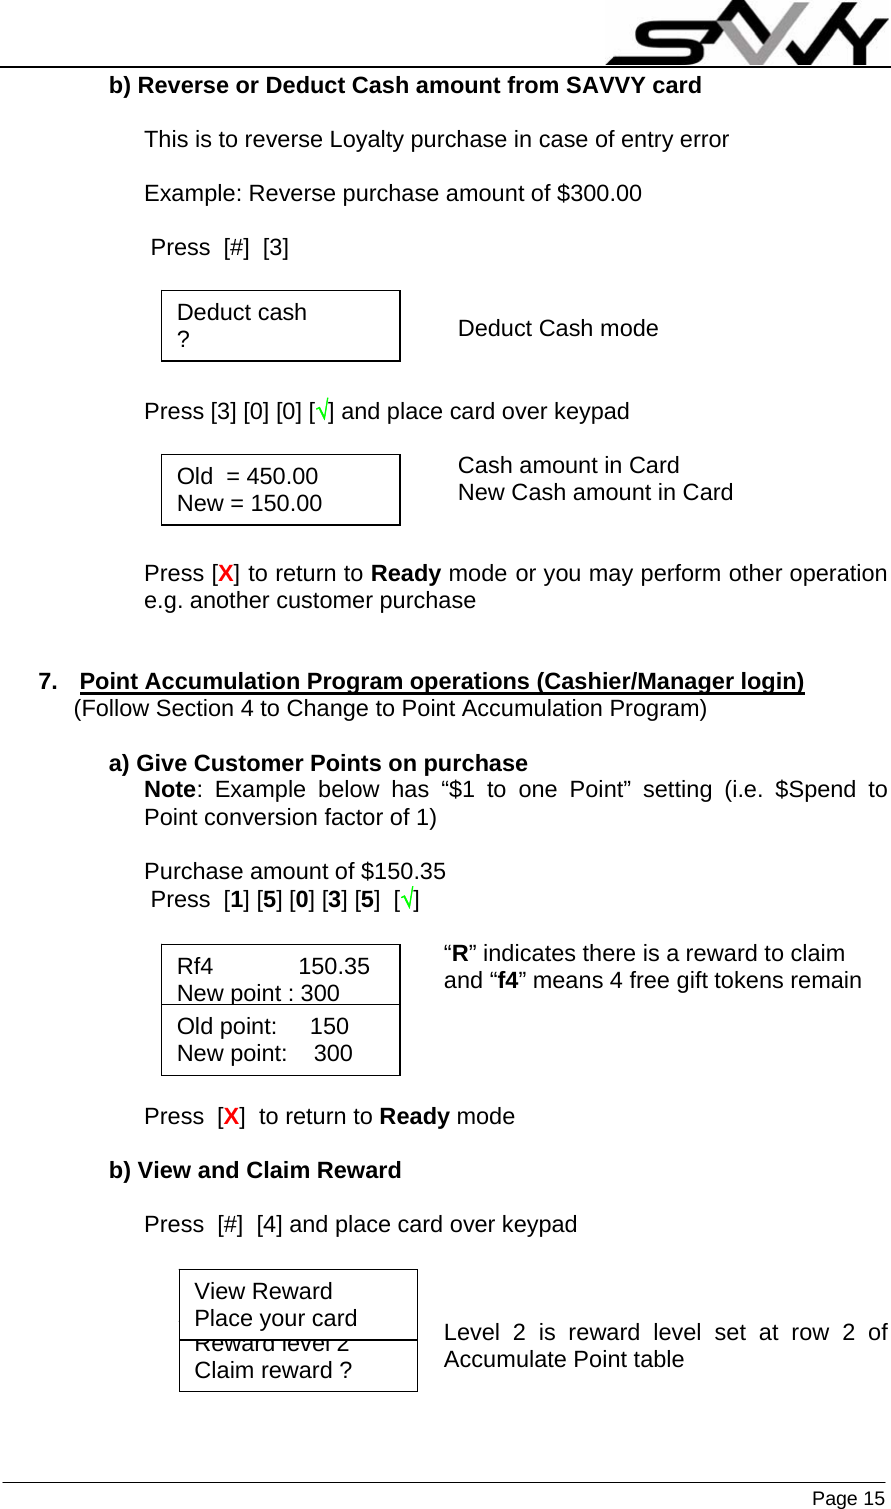                    Page 15  b) Reverse or Deduct Cash amount from SAVVY card  This is to reverse Loyalty purchase in case of entry error  Example: Reverse purchase amount of $300.00   Press  [#]  [3]                                                   Deduct Cash mode   Press [3] [0] [0] [√] and place card over keypad                                                  Cash amount in Card                                                 New Cash amount in Card       Press [X] to return to Ready mode or you may perform other operation e.g. another customer purchase   7.  Point Accumulation Program operations (Cashier/Manager login) (Follow Section 4 to Change to Point Accumulation Program)  a) Give Customer Points on purchase Note: Example below has “$1 to one Point” setting (i.e. $Spend to Point conversion factor of 1)  Purchase amount of $150.35  Press  [1] [5] [0] [3] [5]  [√]  “R” indicates there is a reward to claim and “f4” means 4 free gift tokens remain     Press  [X]  to return to Ready mode  b) View and Claim Reward  Press  [#]  [4] and place card over keypad    Level 2 is reward level set at row 2 of Accumulate Point table    Old  = 450.00 New = 150.00 Deduct cash ? Rf4             150.35 New point : 300 Old point:     150 New point:    300 Reward level 2 Claim reward ? View Reward Place your card 